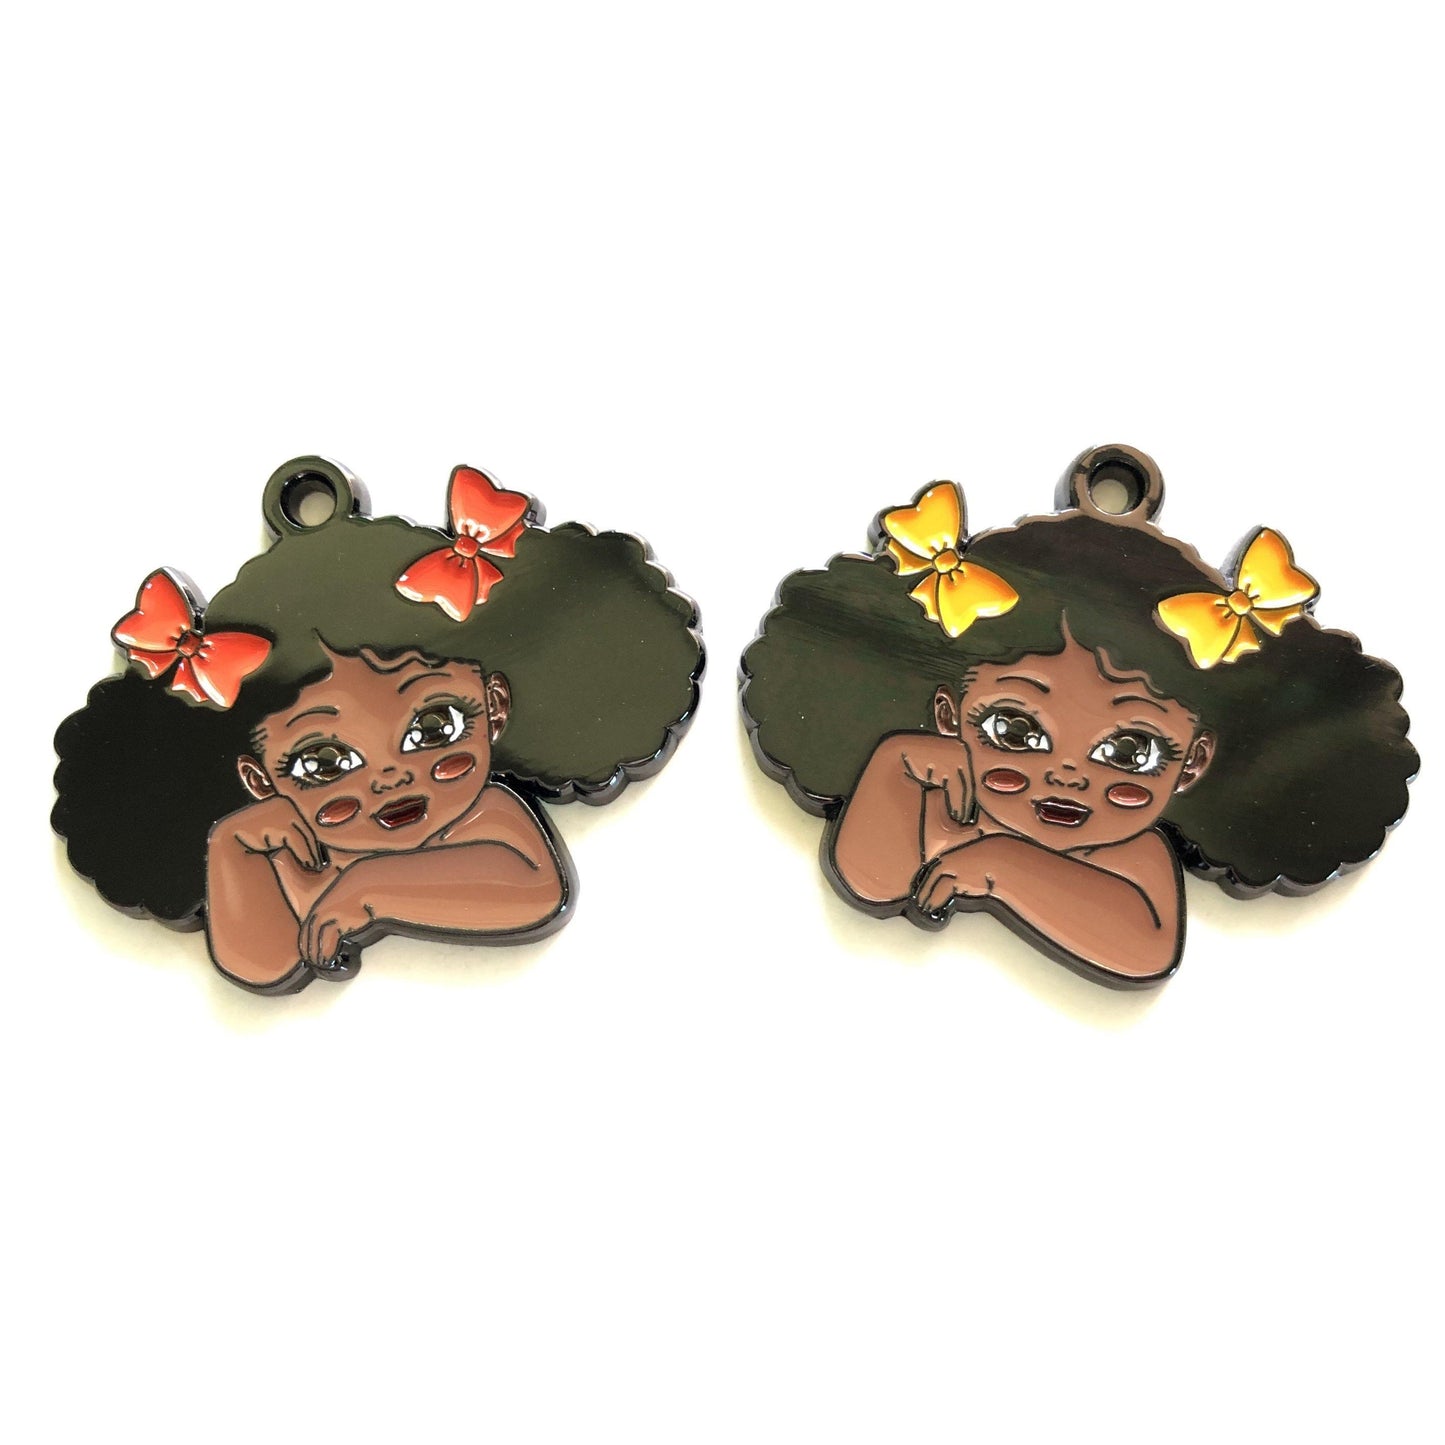 10pcs/lot Cute Little Black Girl Charm Mix Colors Enamel Afro Charms On Sale Charms Beads Beyond